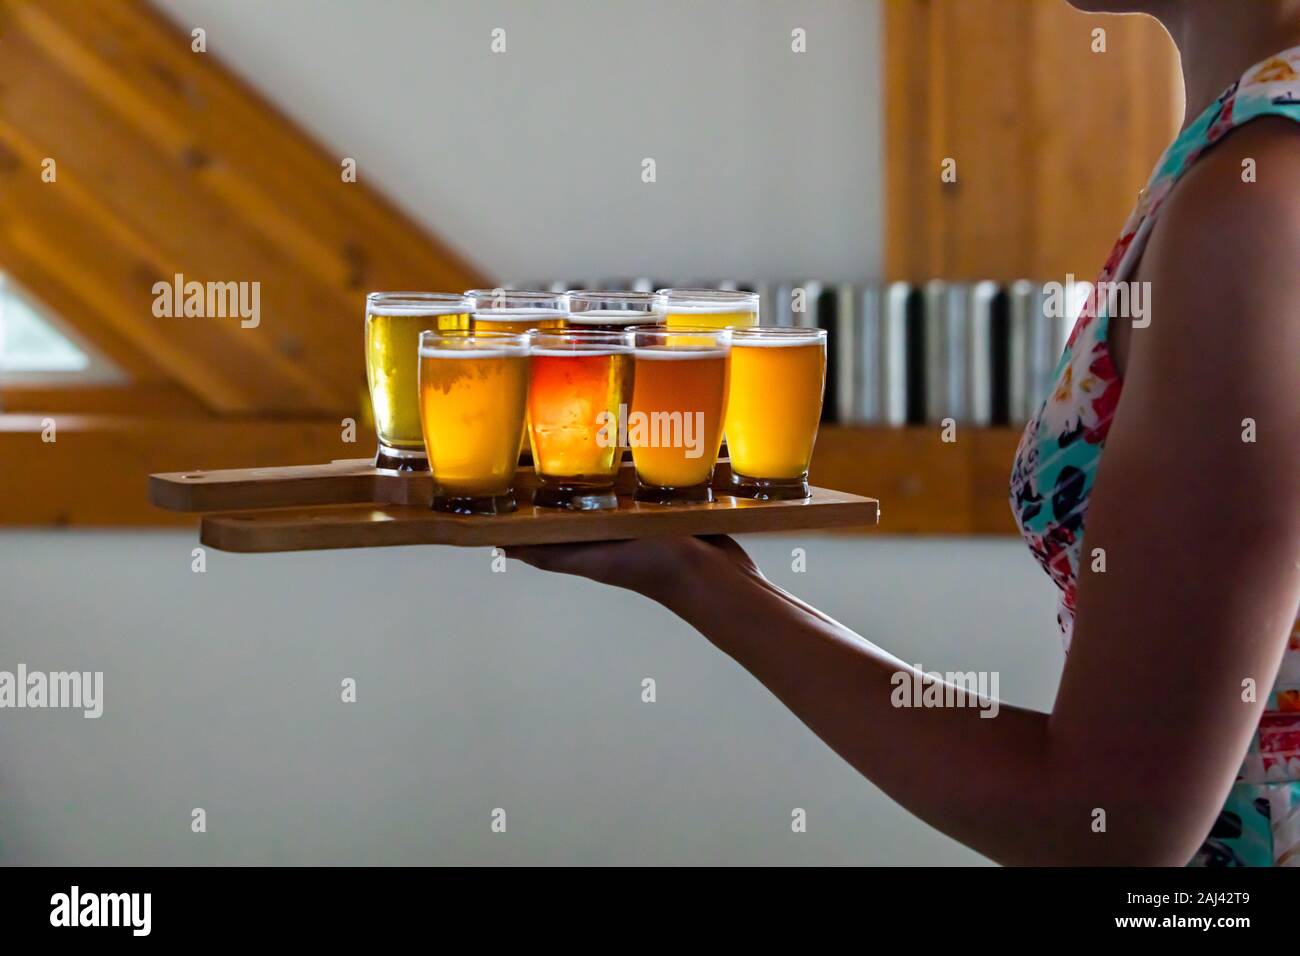 selective focus on Flight of Craft of different Beers glasses on Wooden two Tray, on caucasian woman hand serving, holding the trays side view Stock Photo